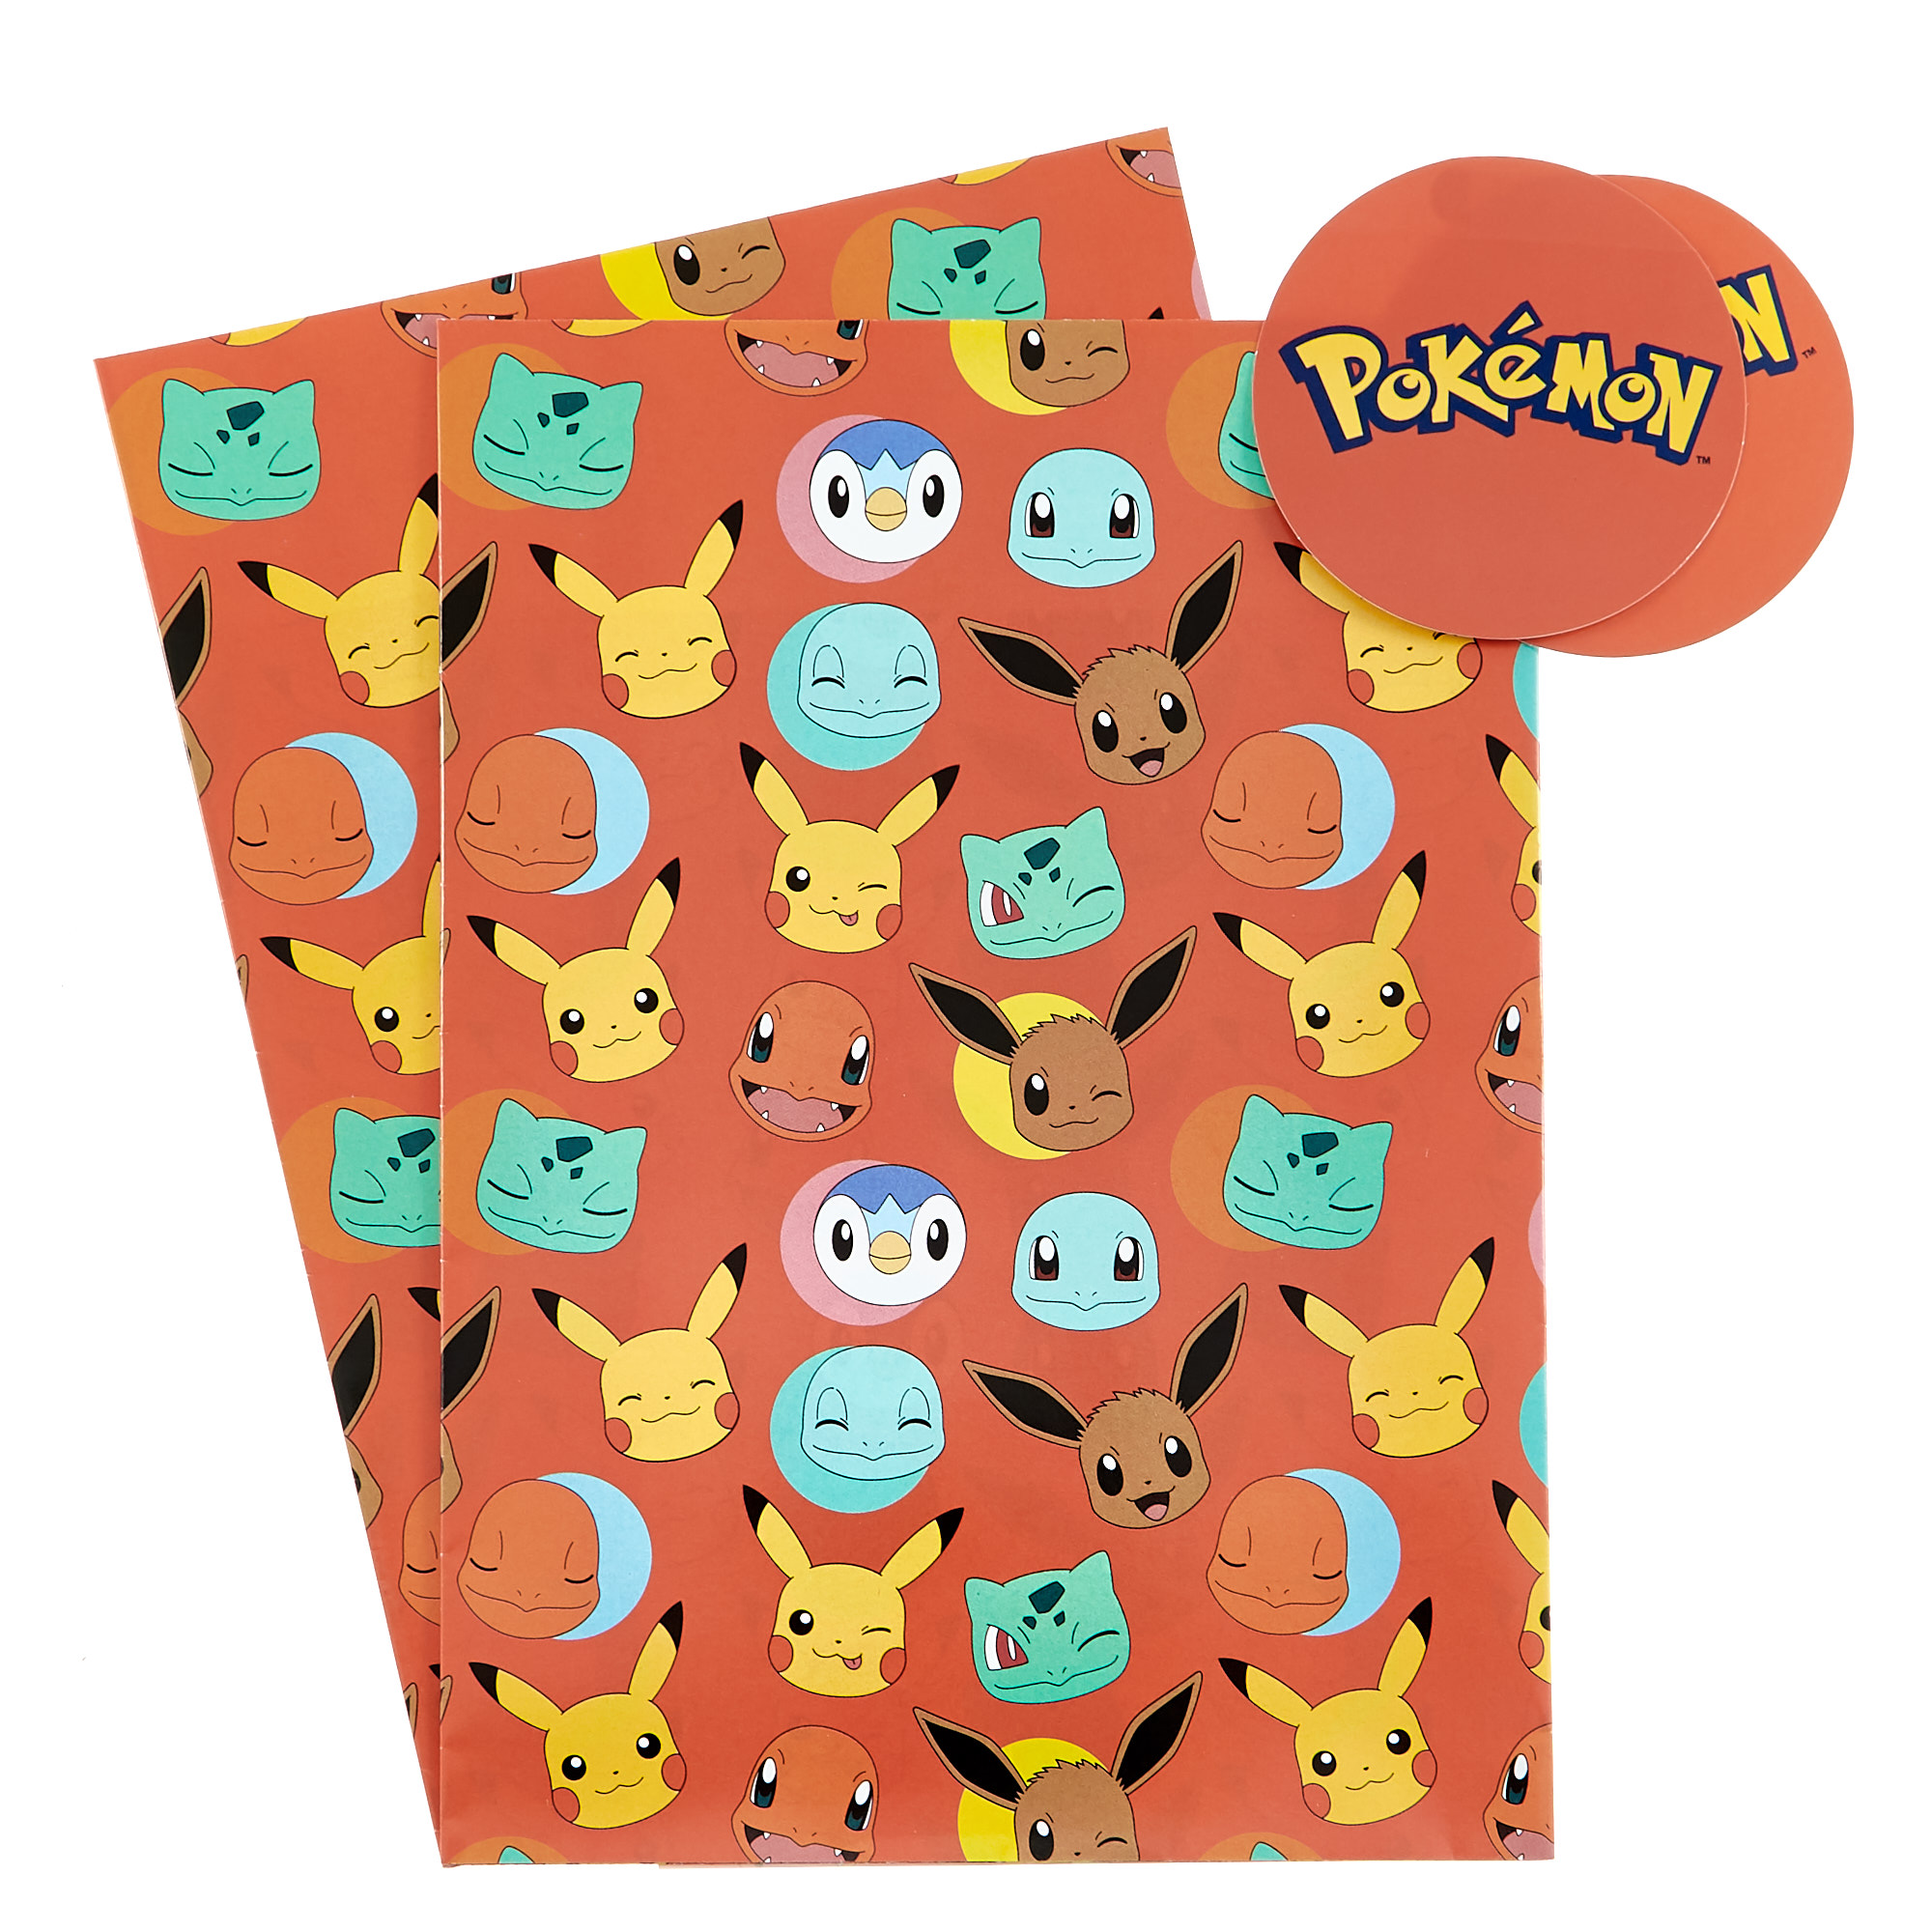 Pokémon Wrapping Paper & Gift Tags - Pack of 2 